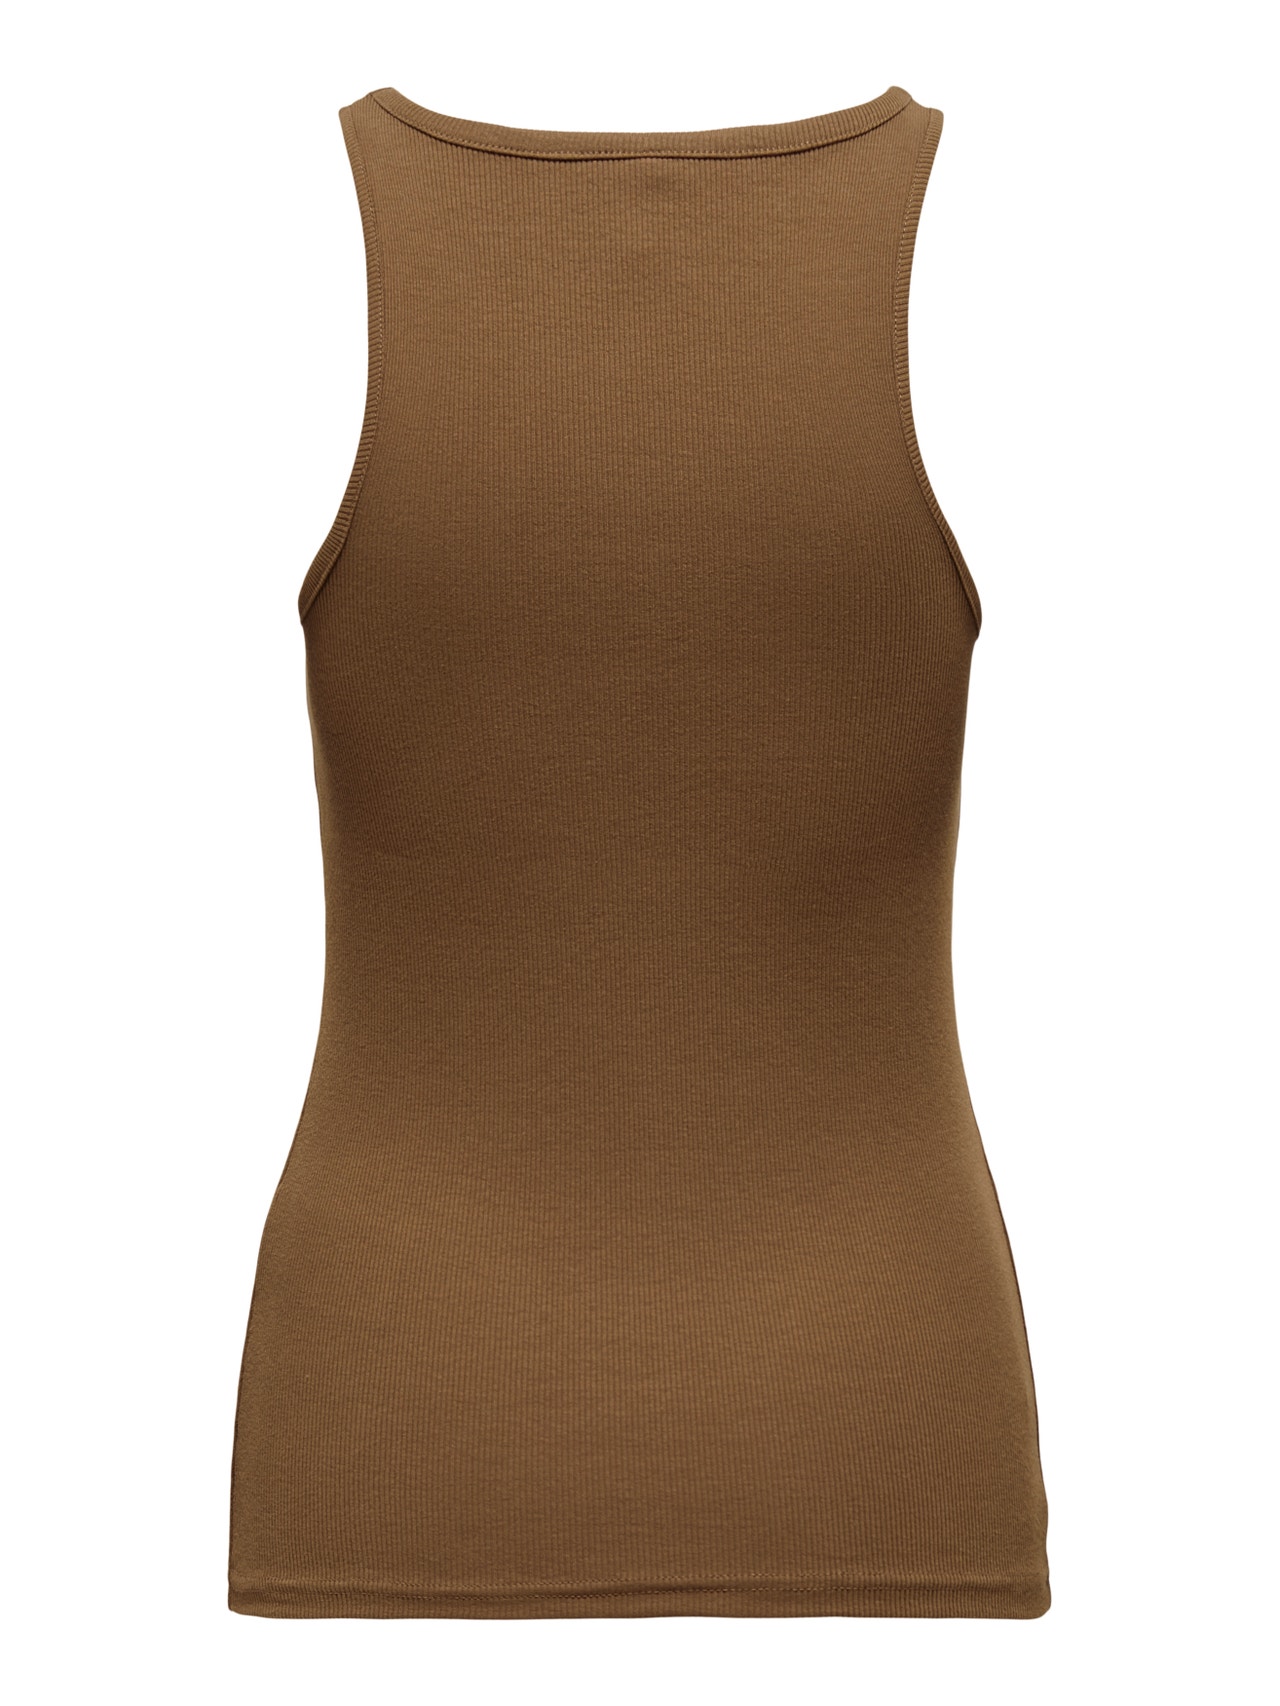 ONLY Rib Tank top -Toffee - 15234659